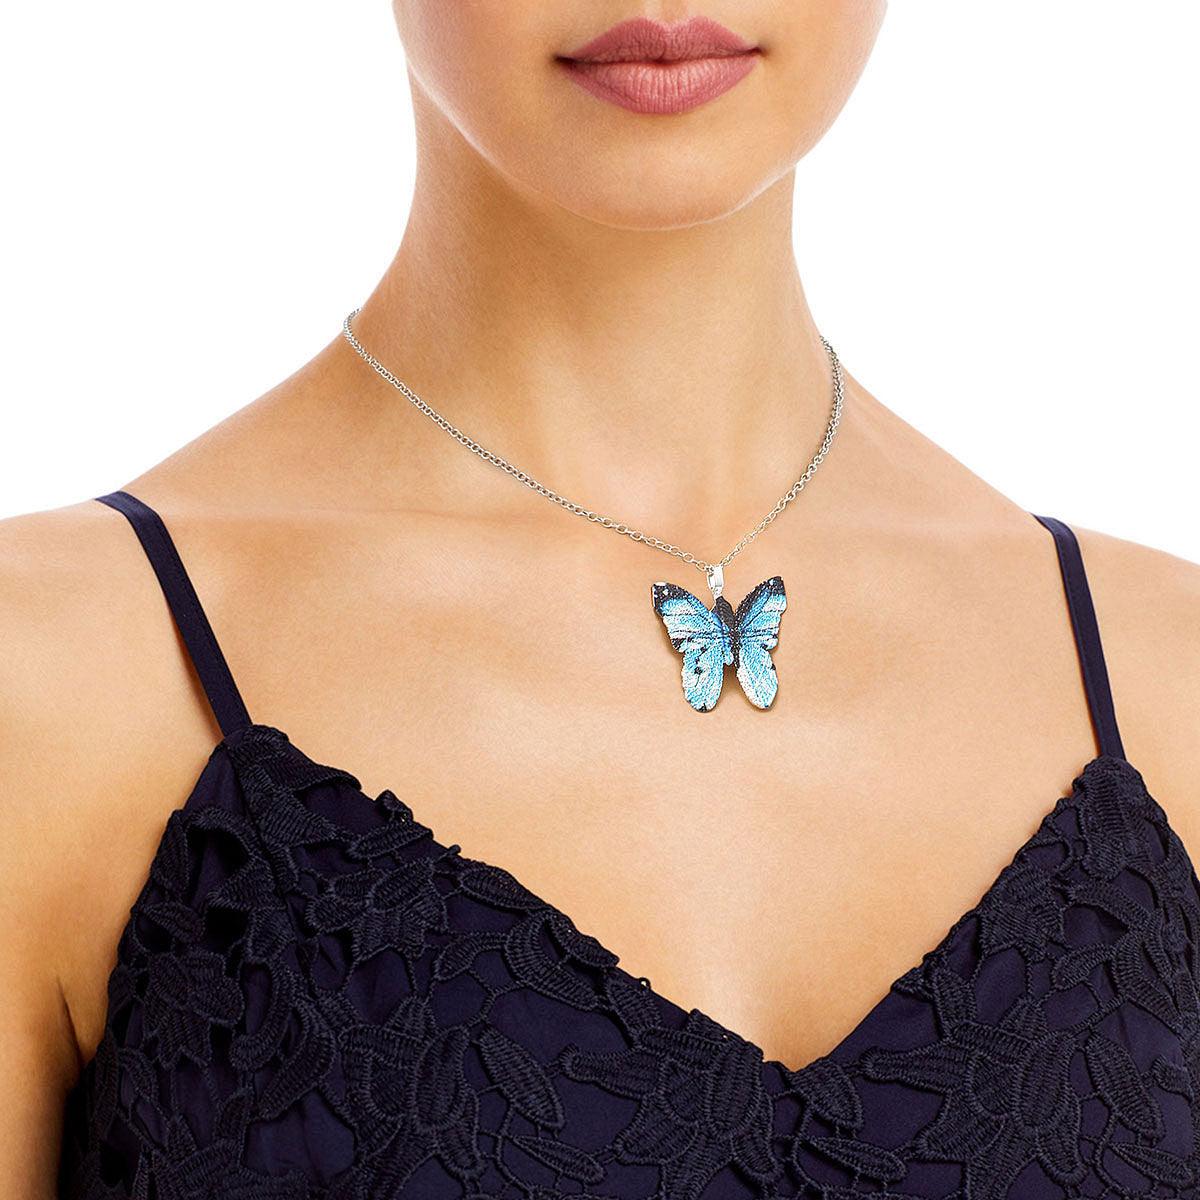 Get ready to flutter with our Blue Butterfly Necklace